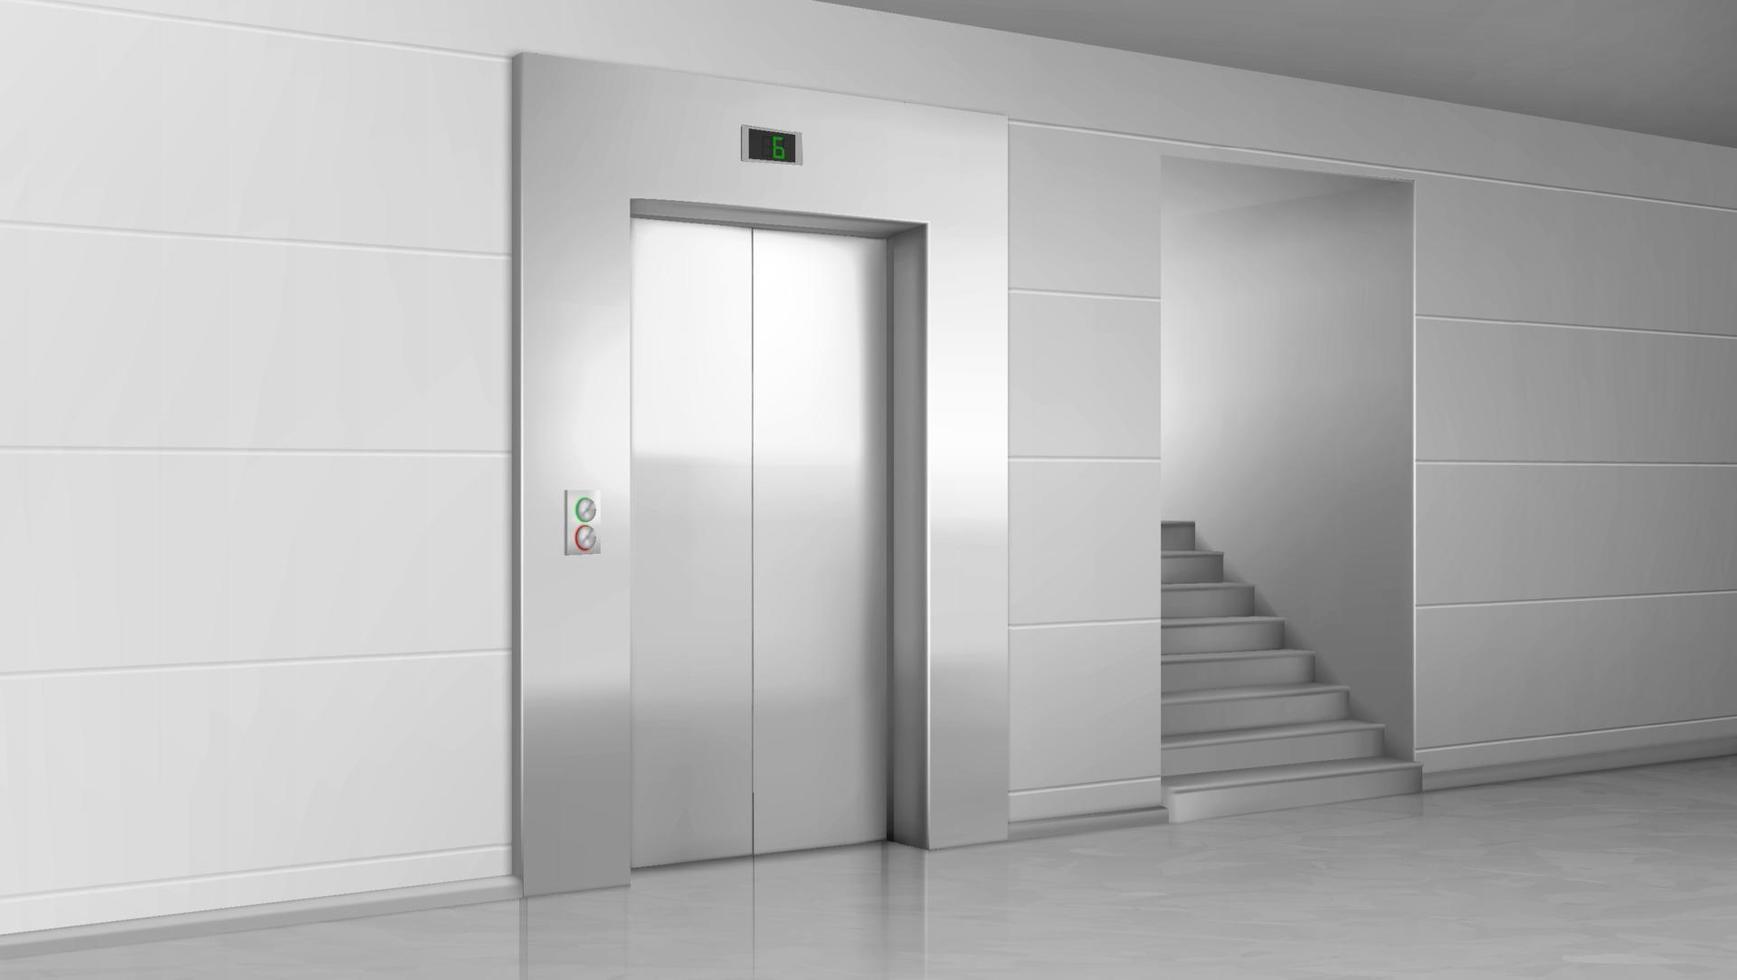 Lift door and stairs in lobby, closed elevator vector